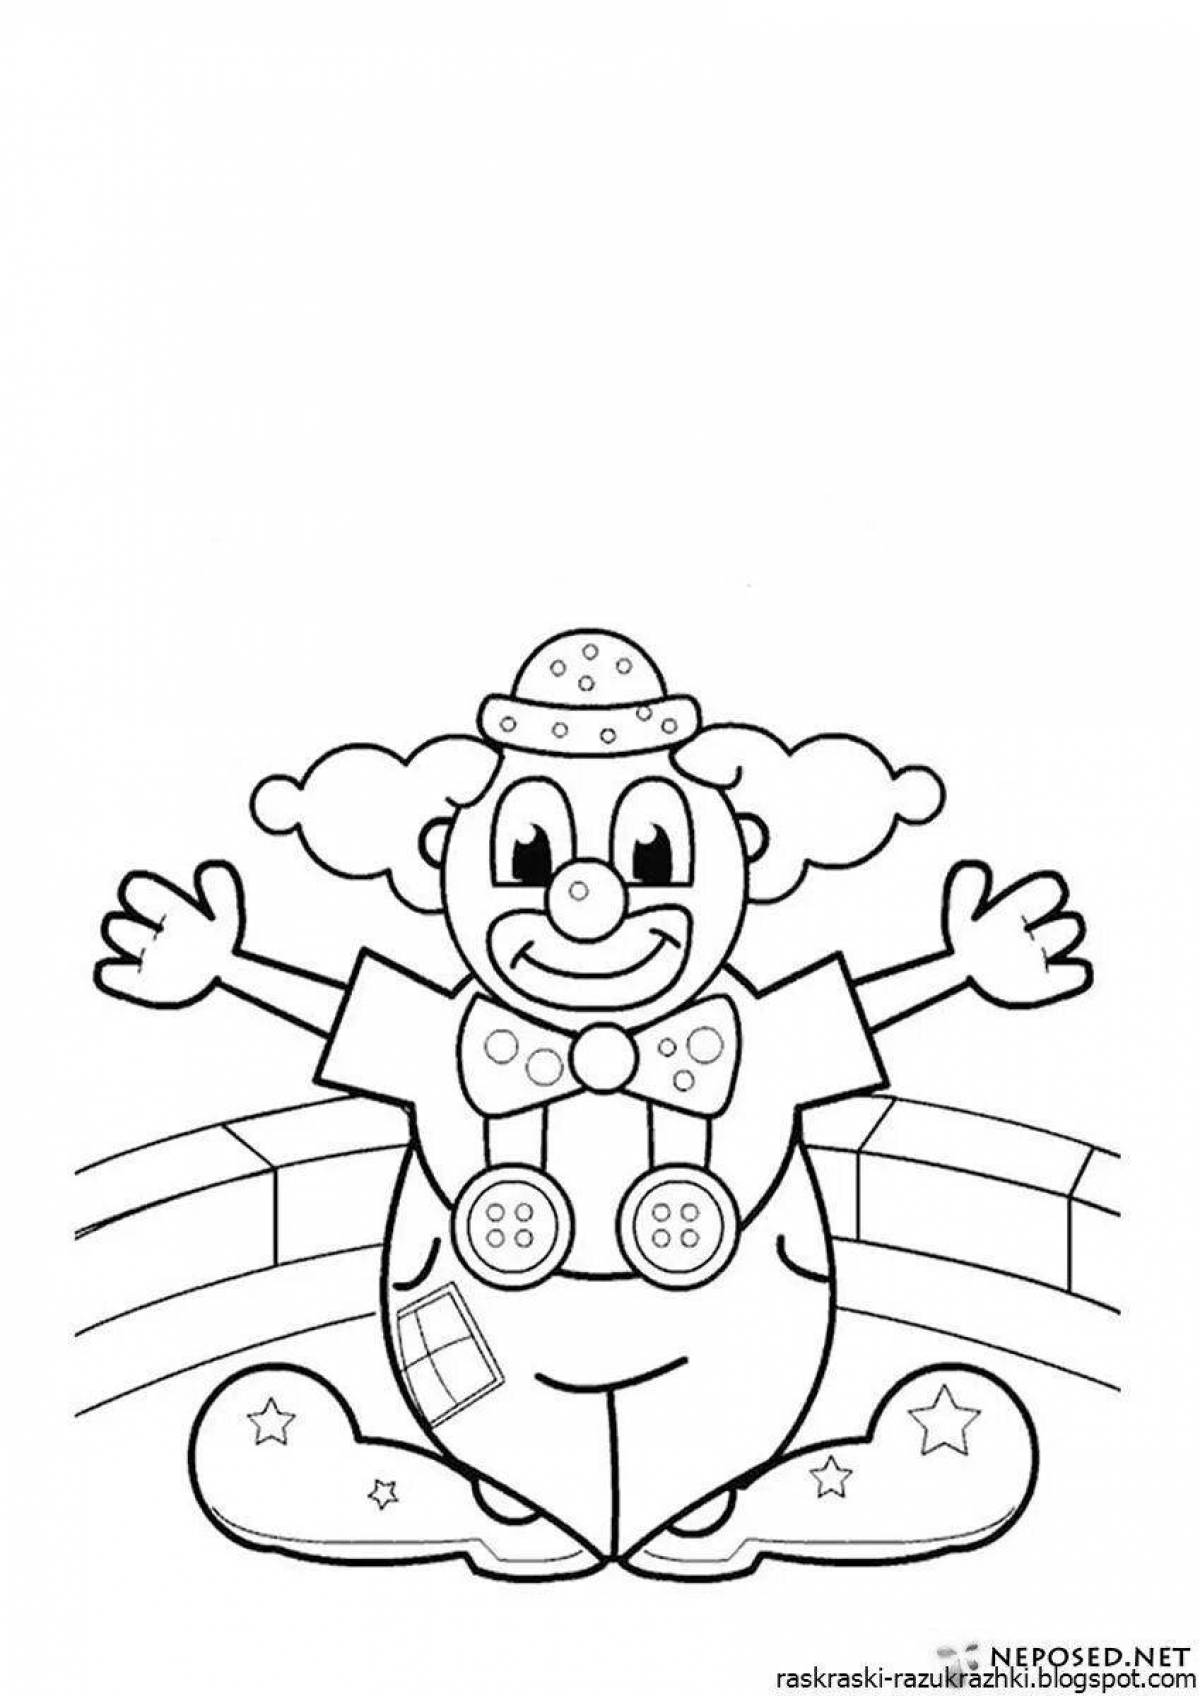 Adorable clown coloring book for kids